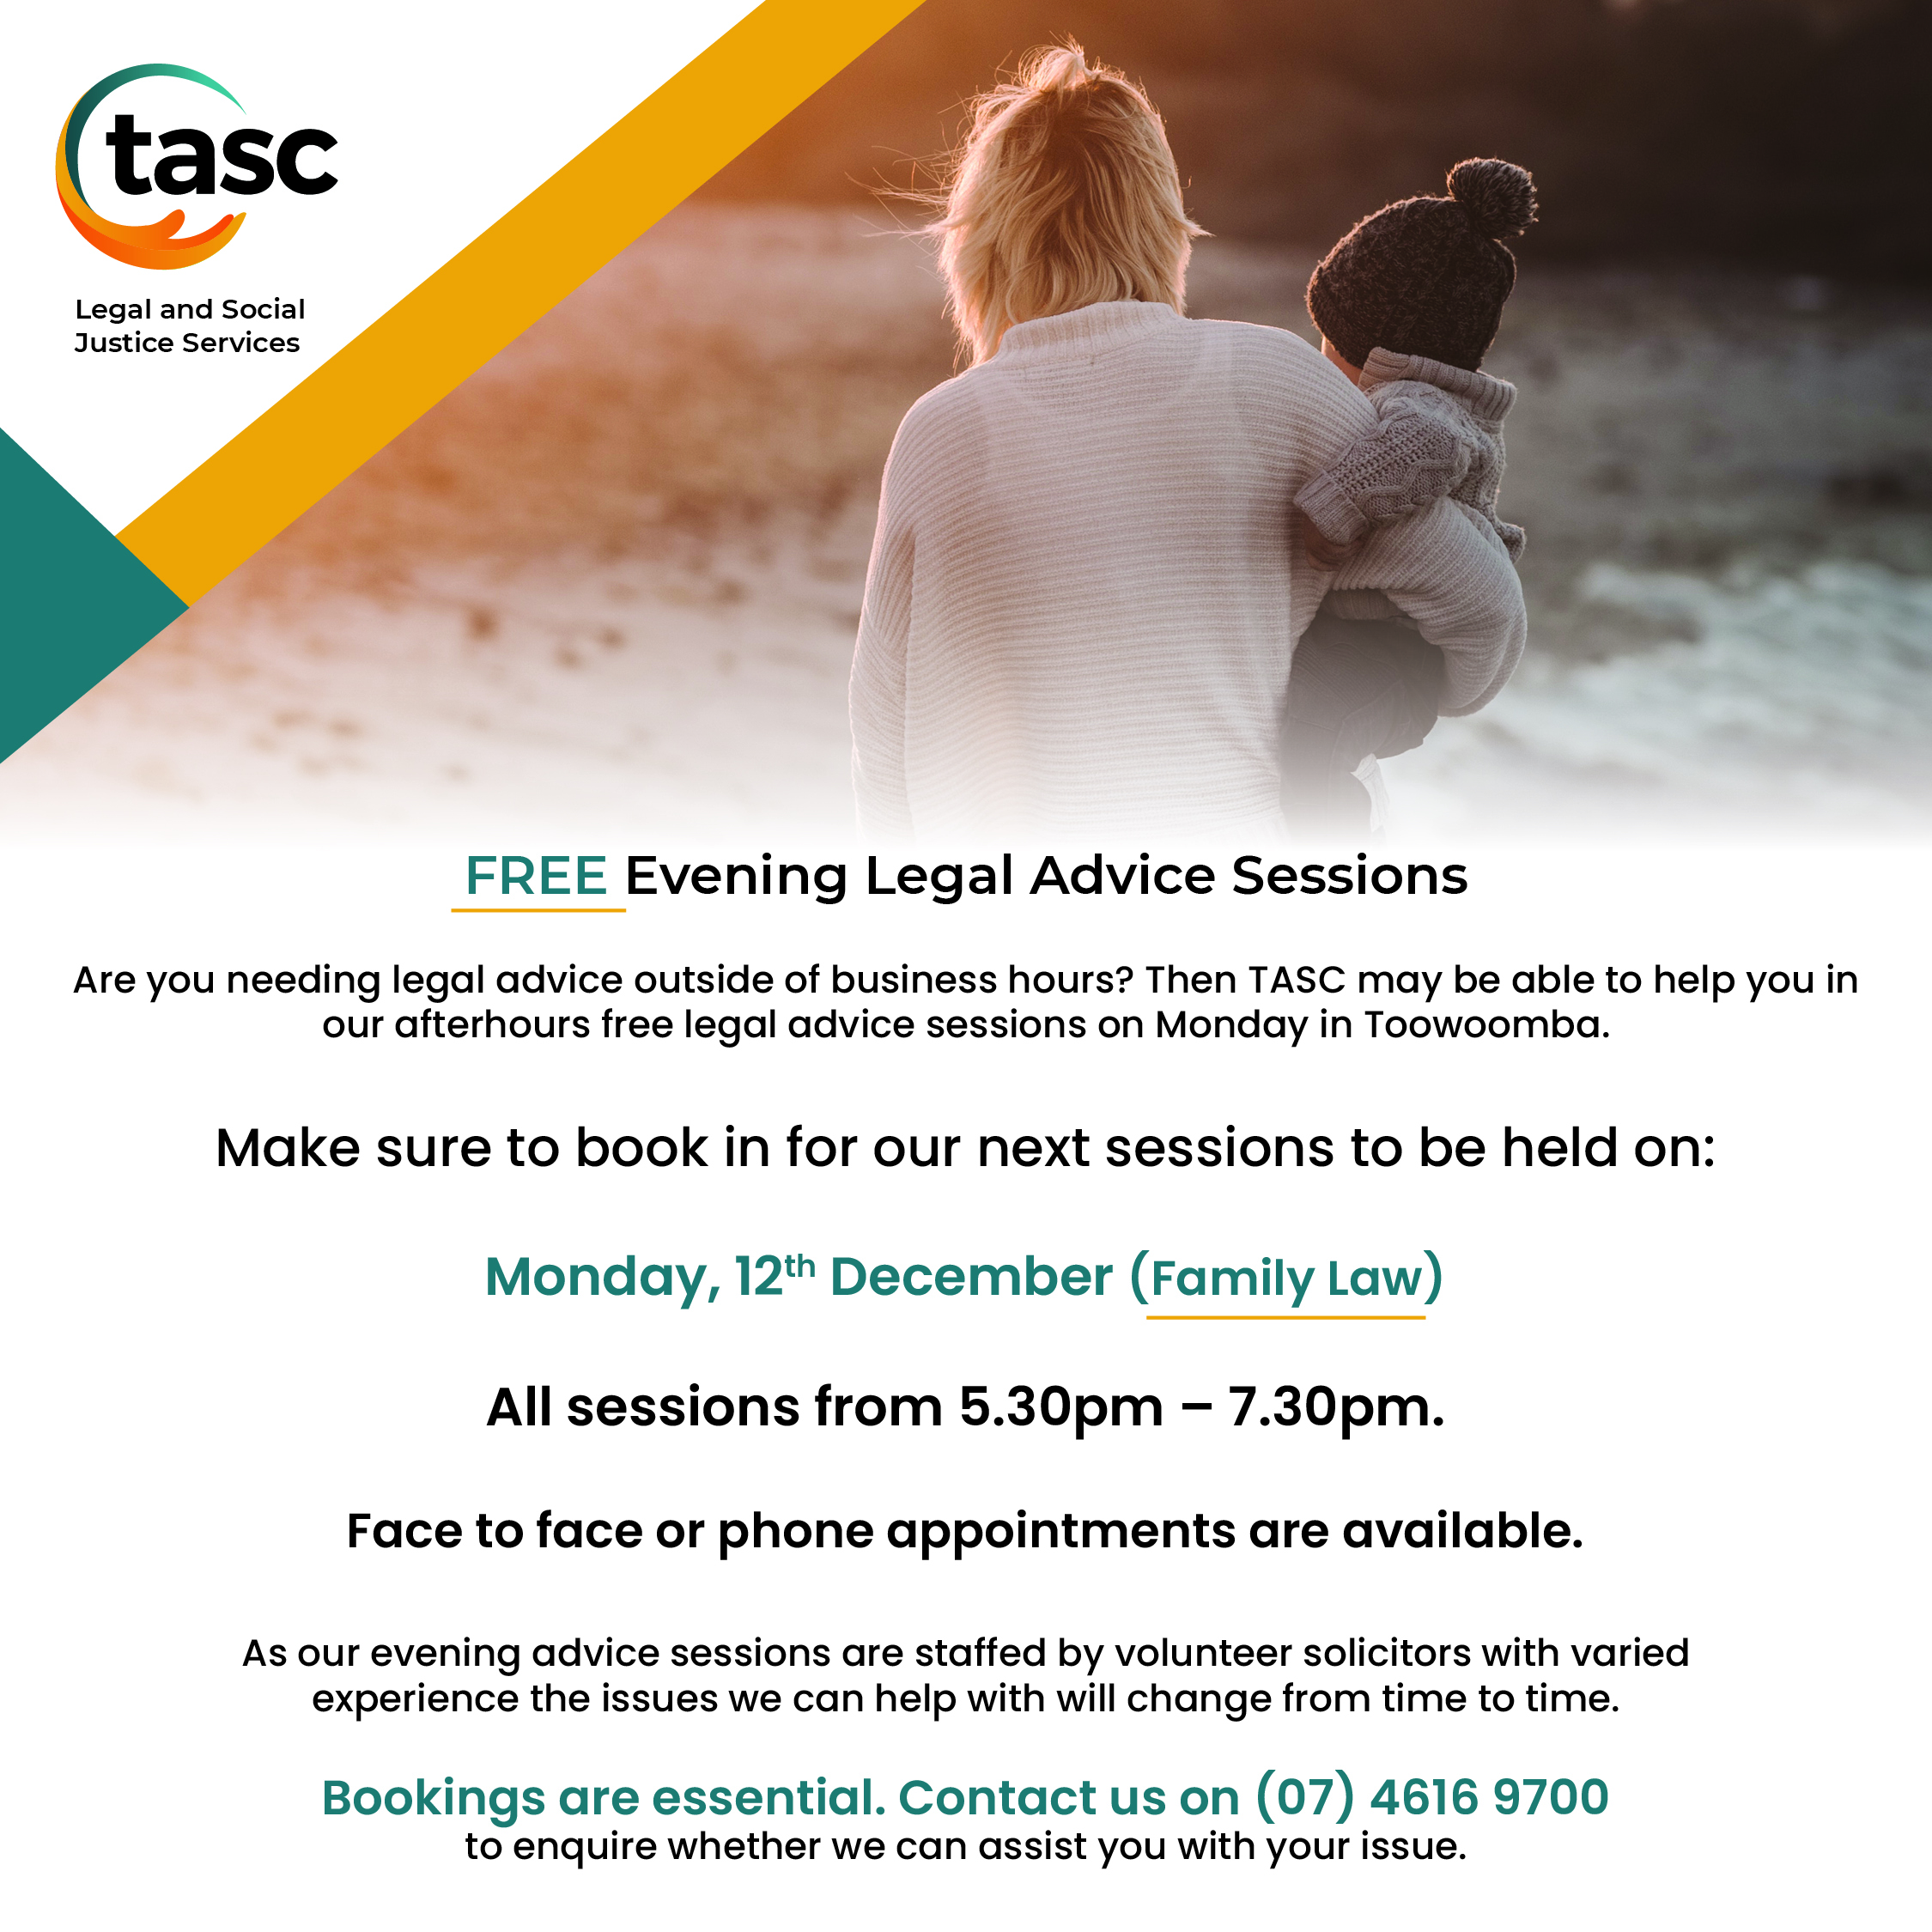 Free Evening Legal Advice Sessions (Family Law) Monday, 12 December 2022